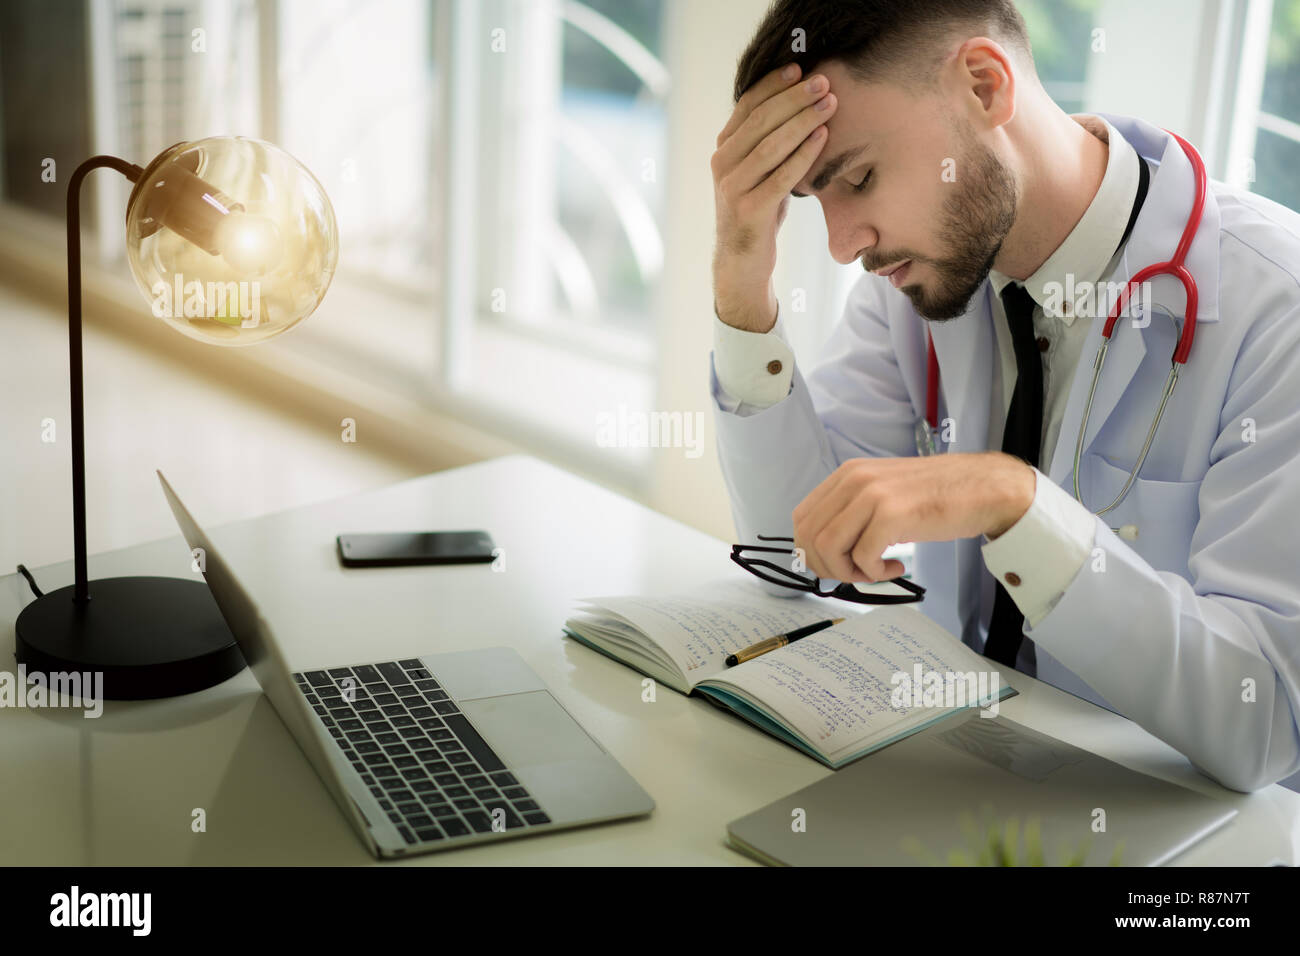 Doctors are making serious faces and stressed about work. The doctor is feeling a headache at work and feeling stressed in treating the patient. Stock Photo